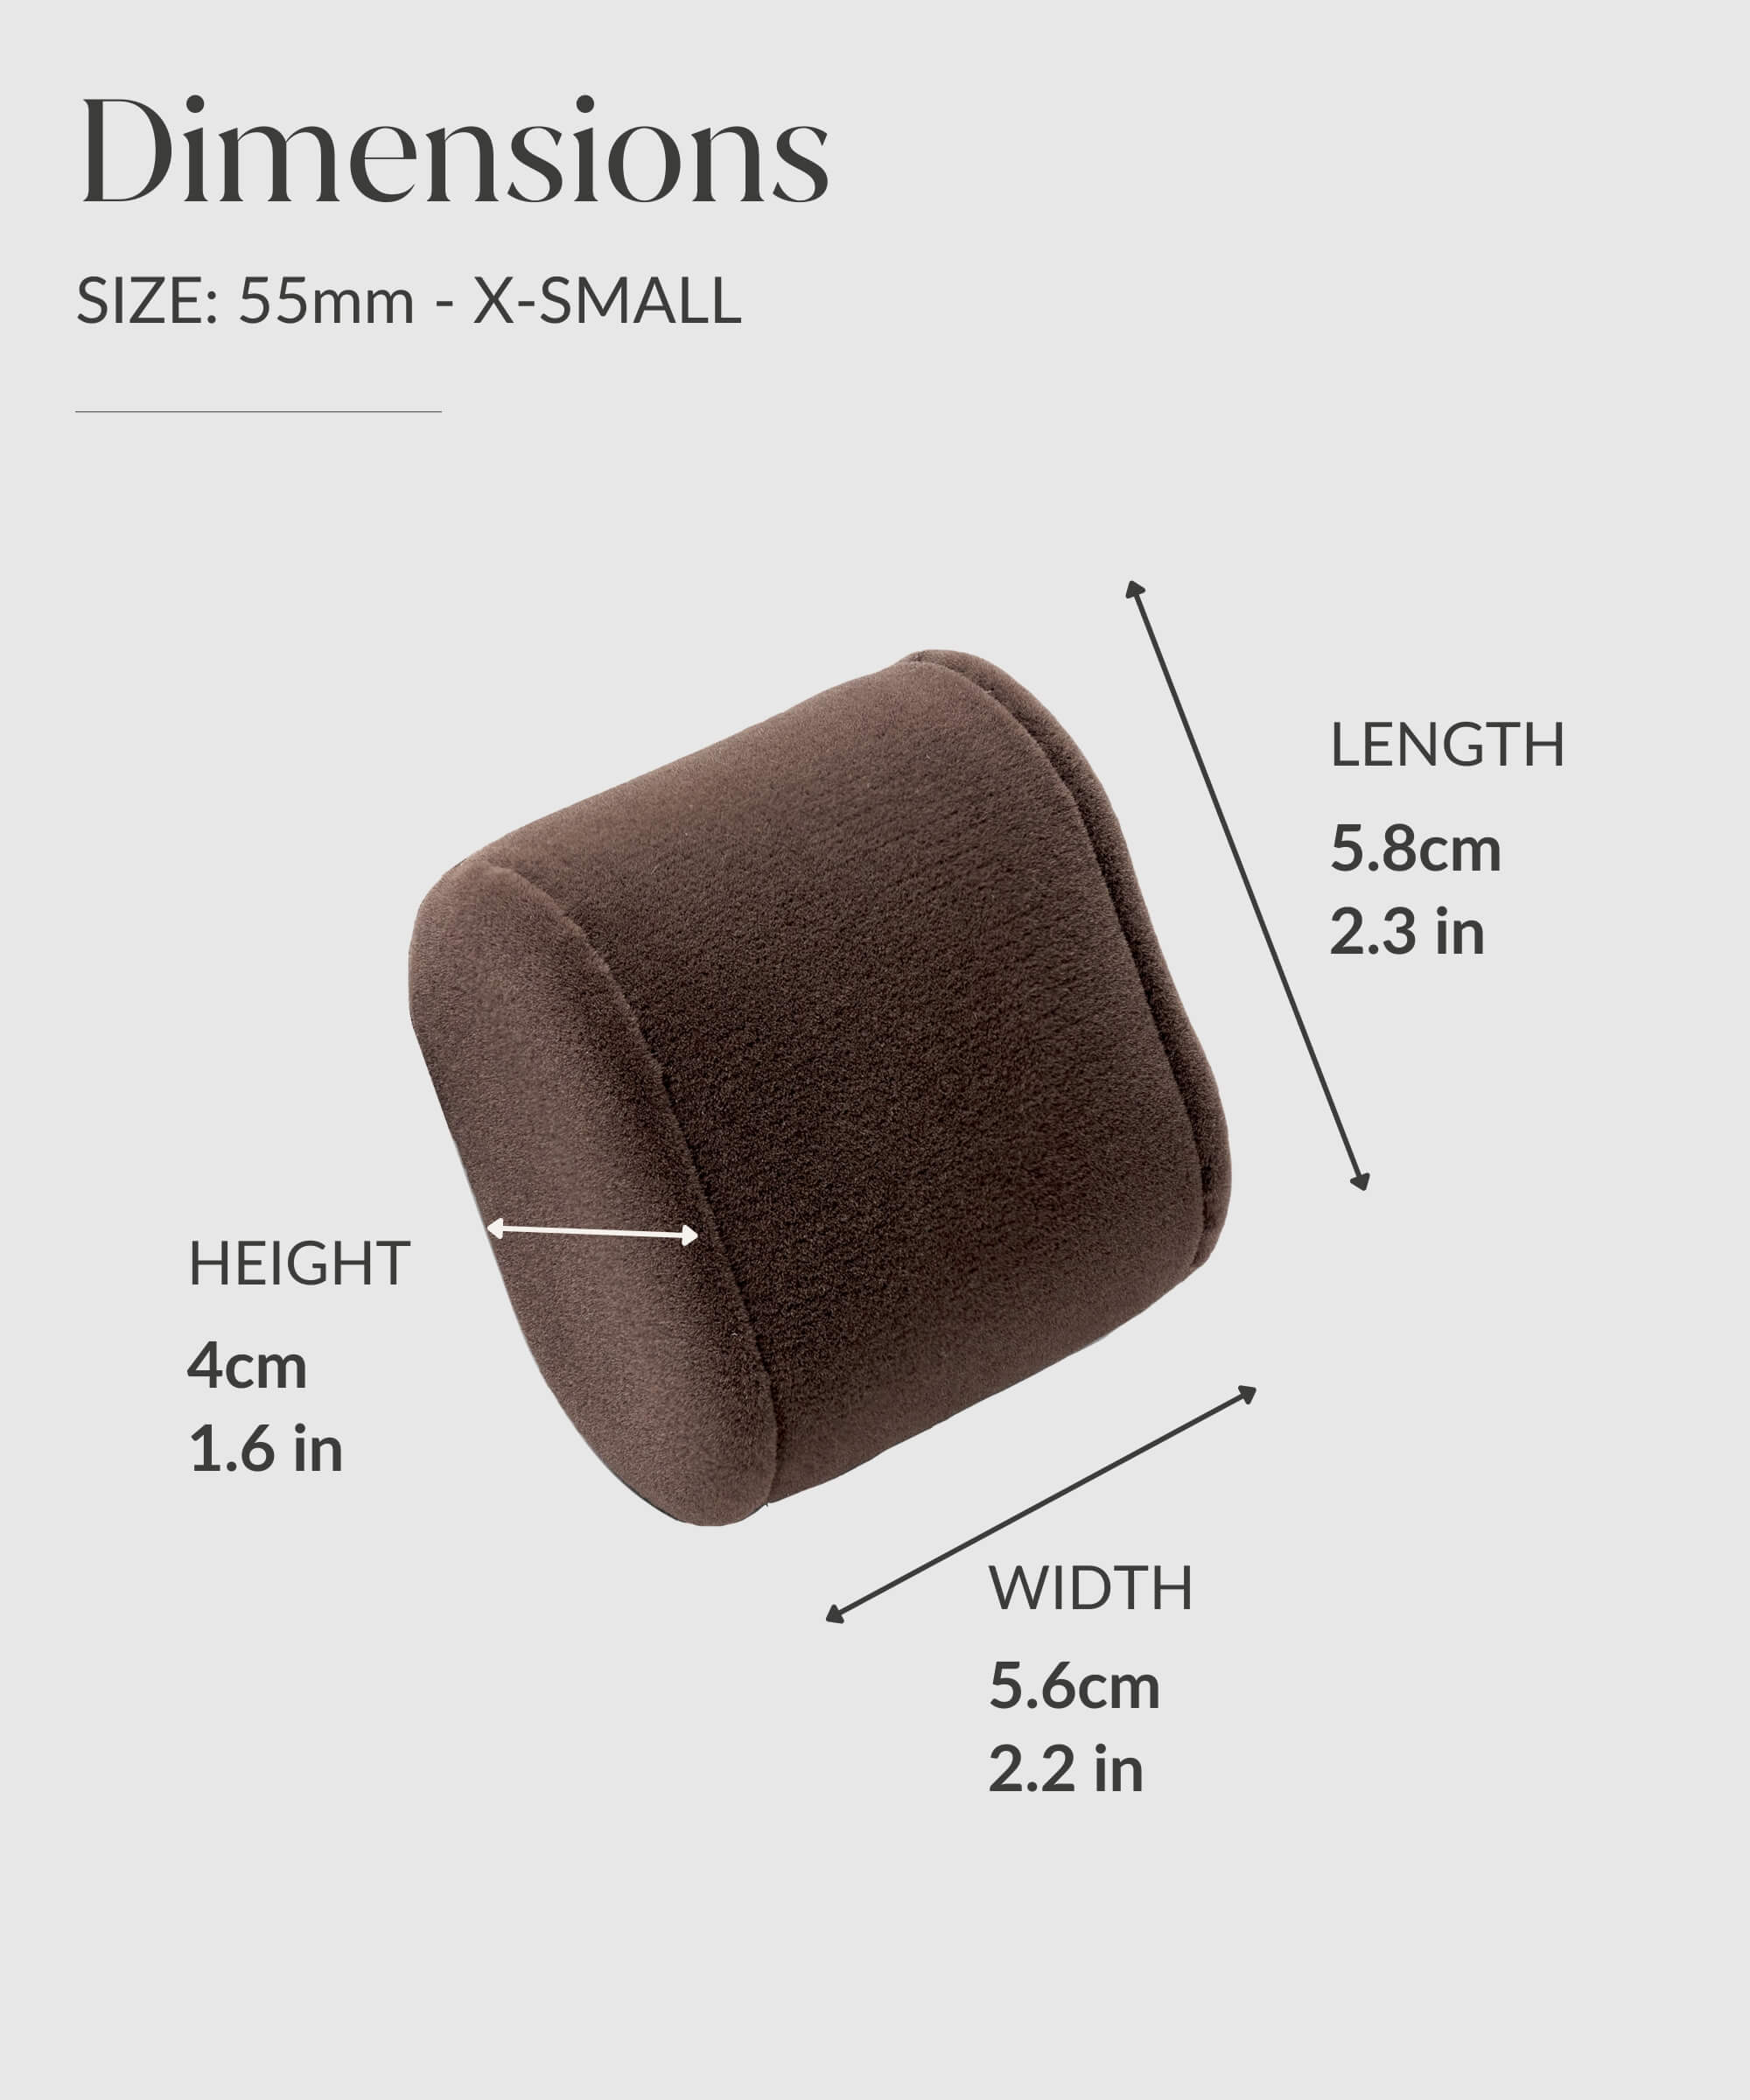 A diagram showing the dimensions of a cushion, suitable for wrist size measurement and providing information on TAWBURY Bayswater Replacement Watch Box Pillows - 55mm - X-Small and watch boxes.